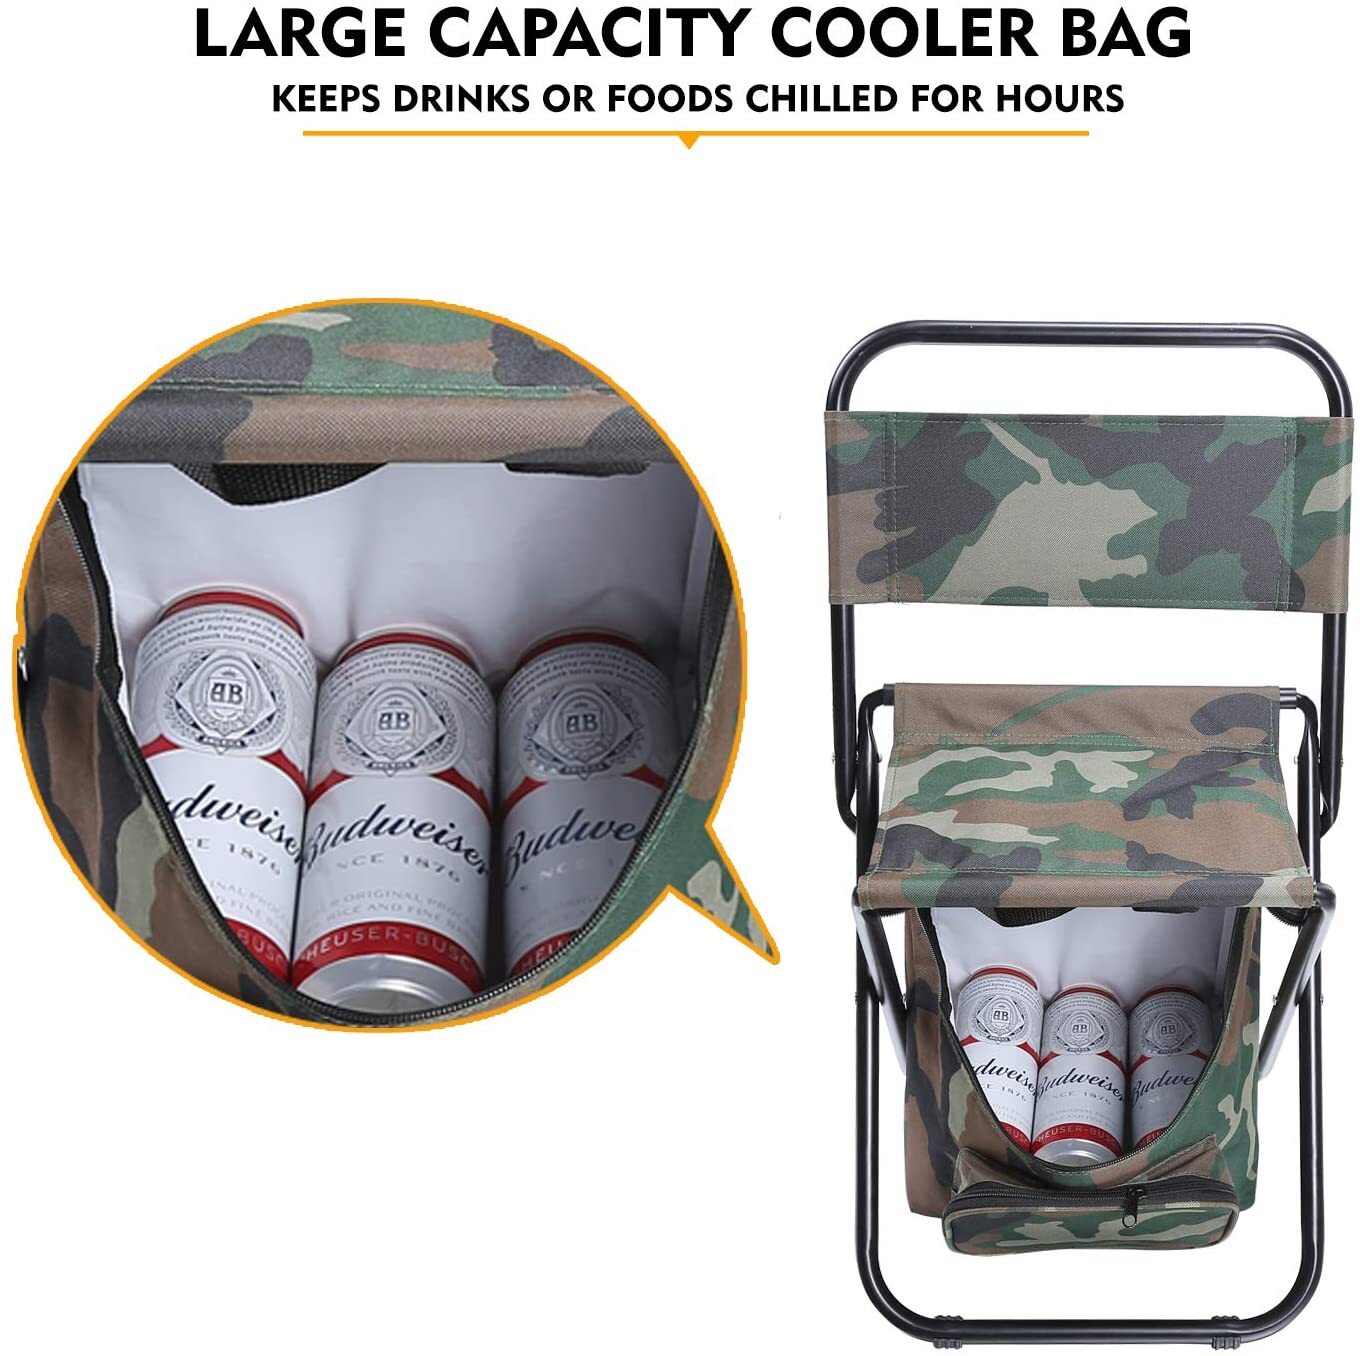 https://images.51microshop.com/5848/product/20201209/LEADALLWAY_Foldable_Camping_Chair_with_Cooler_Bag_Compact_Fishing_Stool_1607505256534_4.jpg